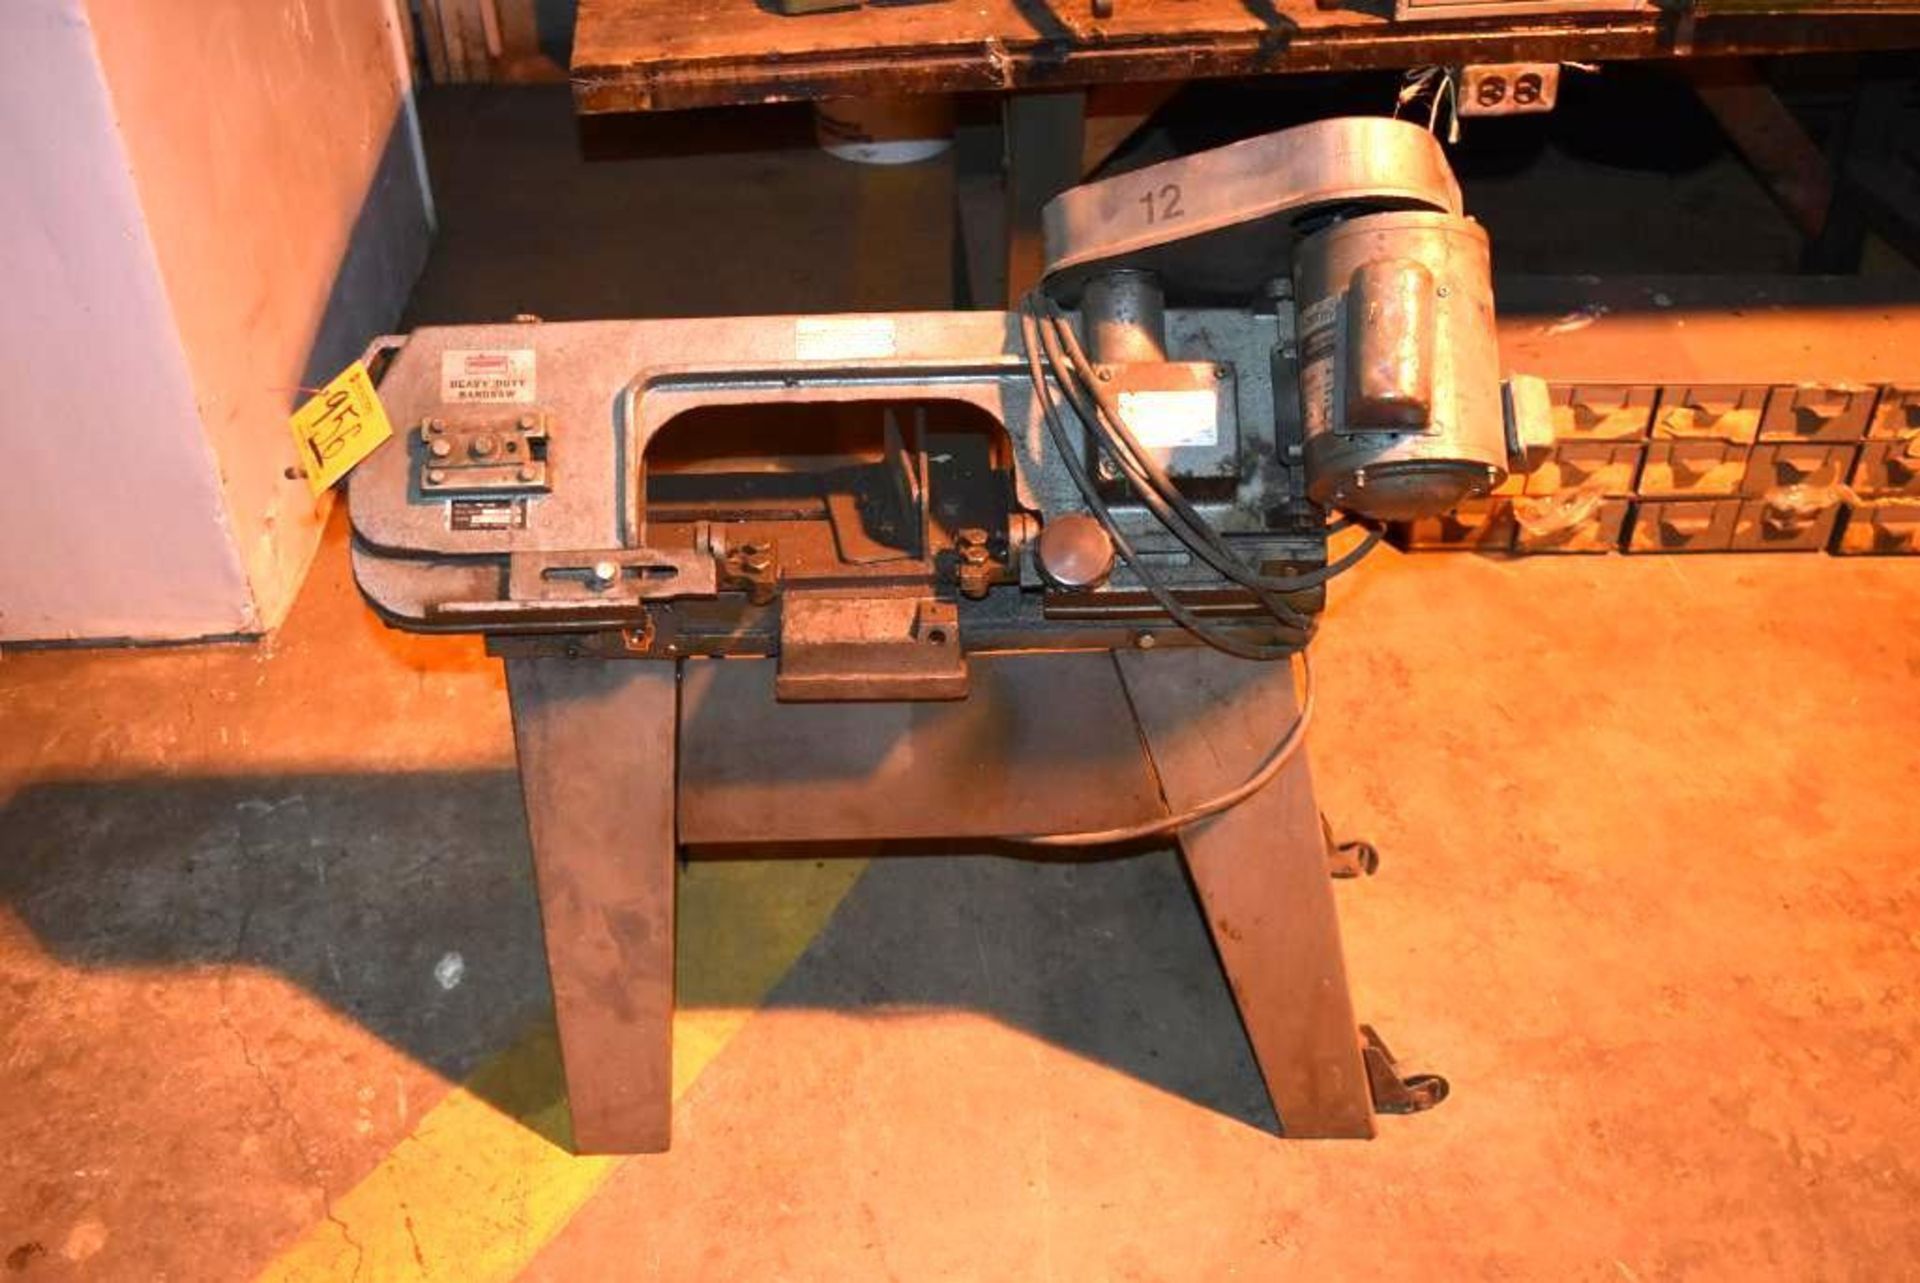 Duracraft H.D. Portable Bandsaw Model HBS-346 S/N 005565 - Image 2 of 14